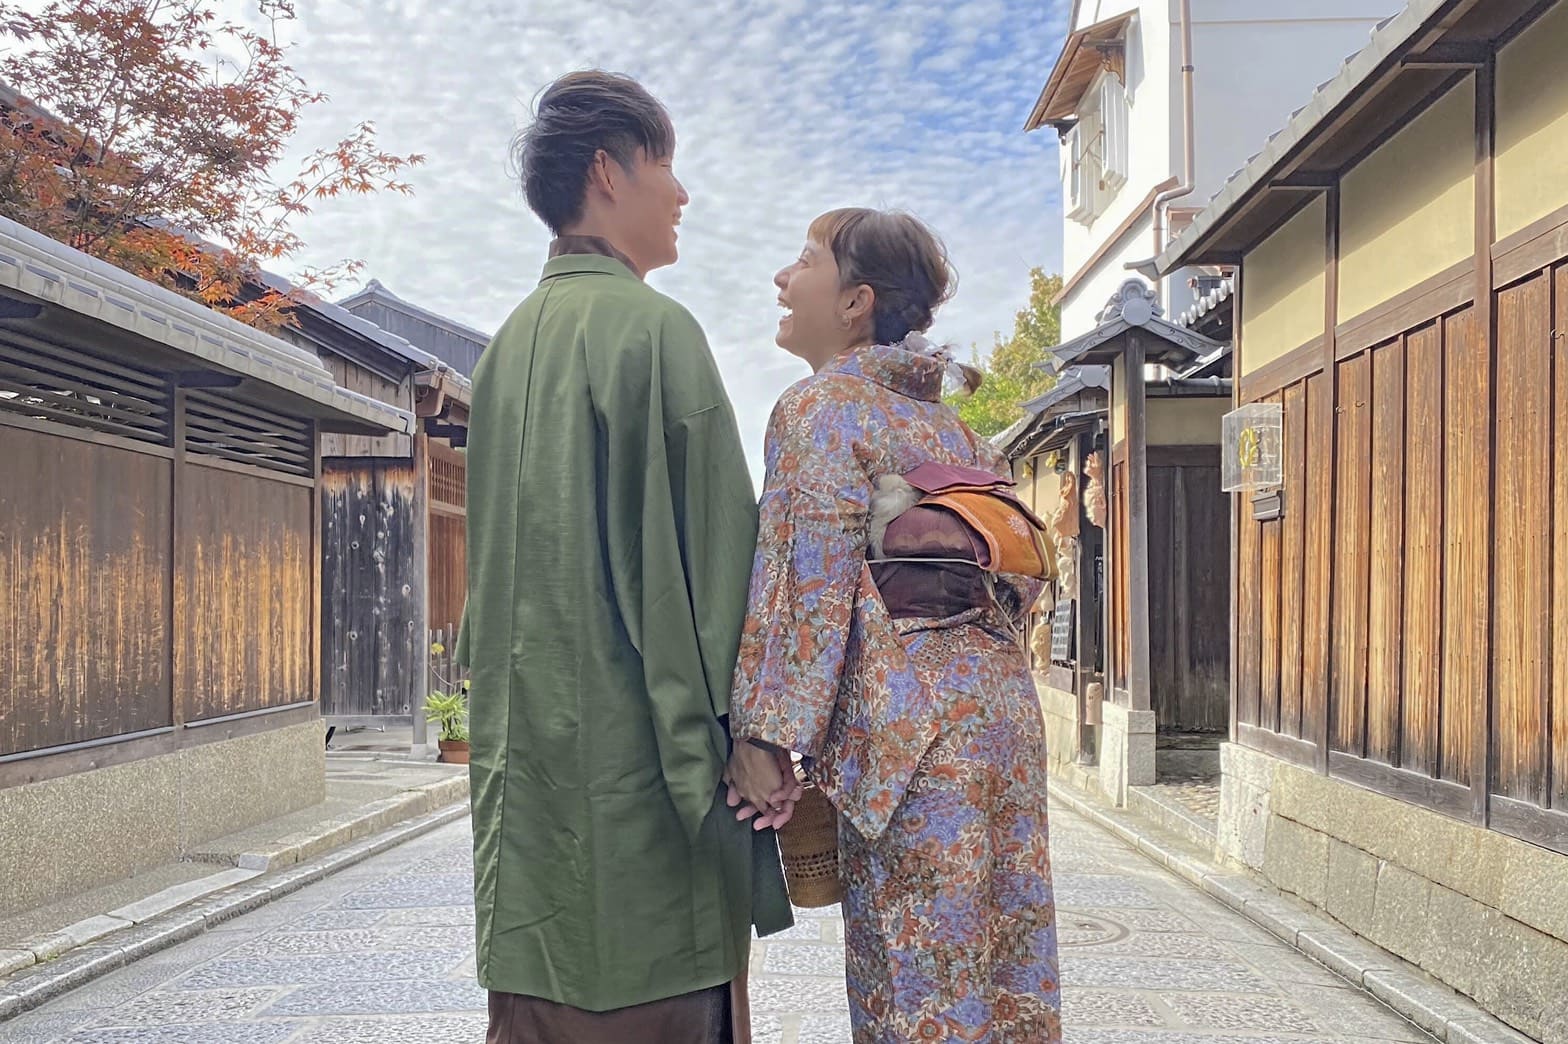 Recommended for Couples Wishing to Enjoy a Kimono Date in Kyoto